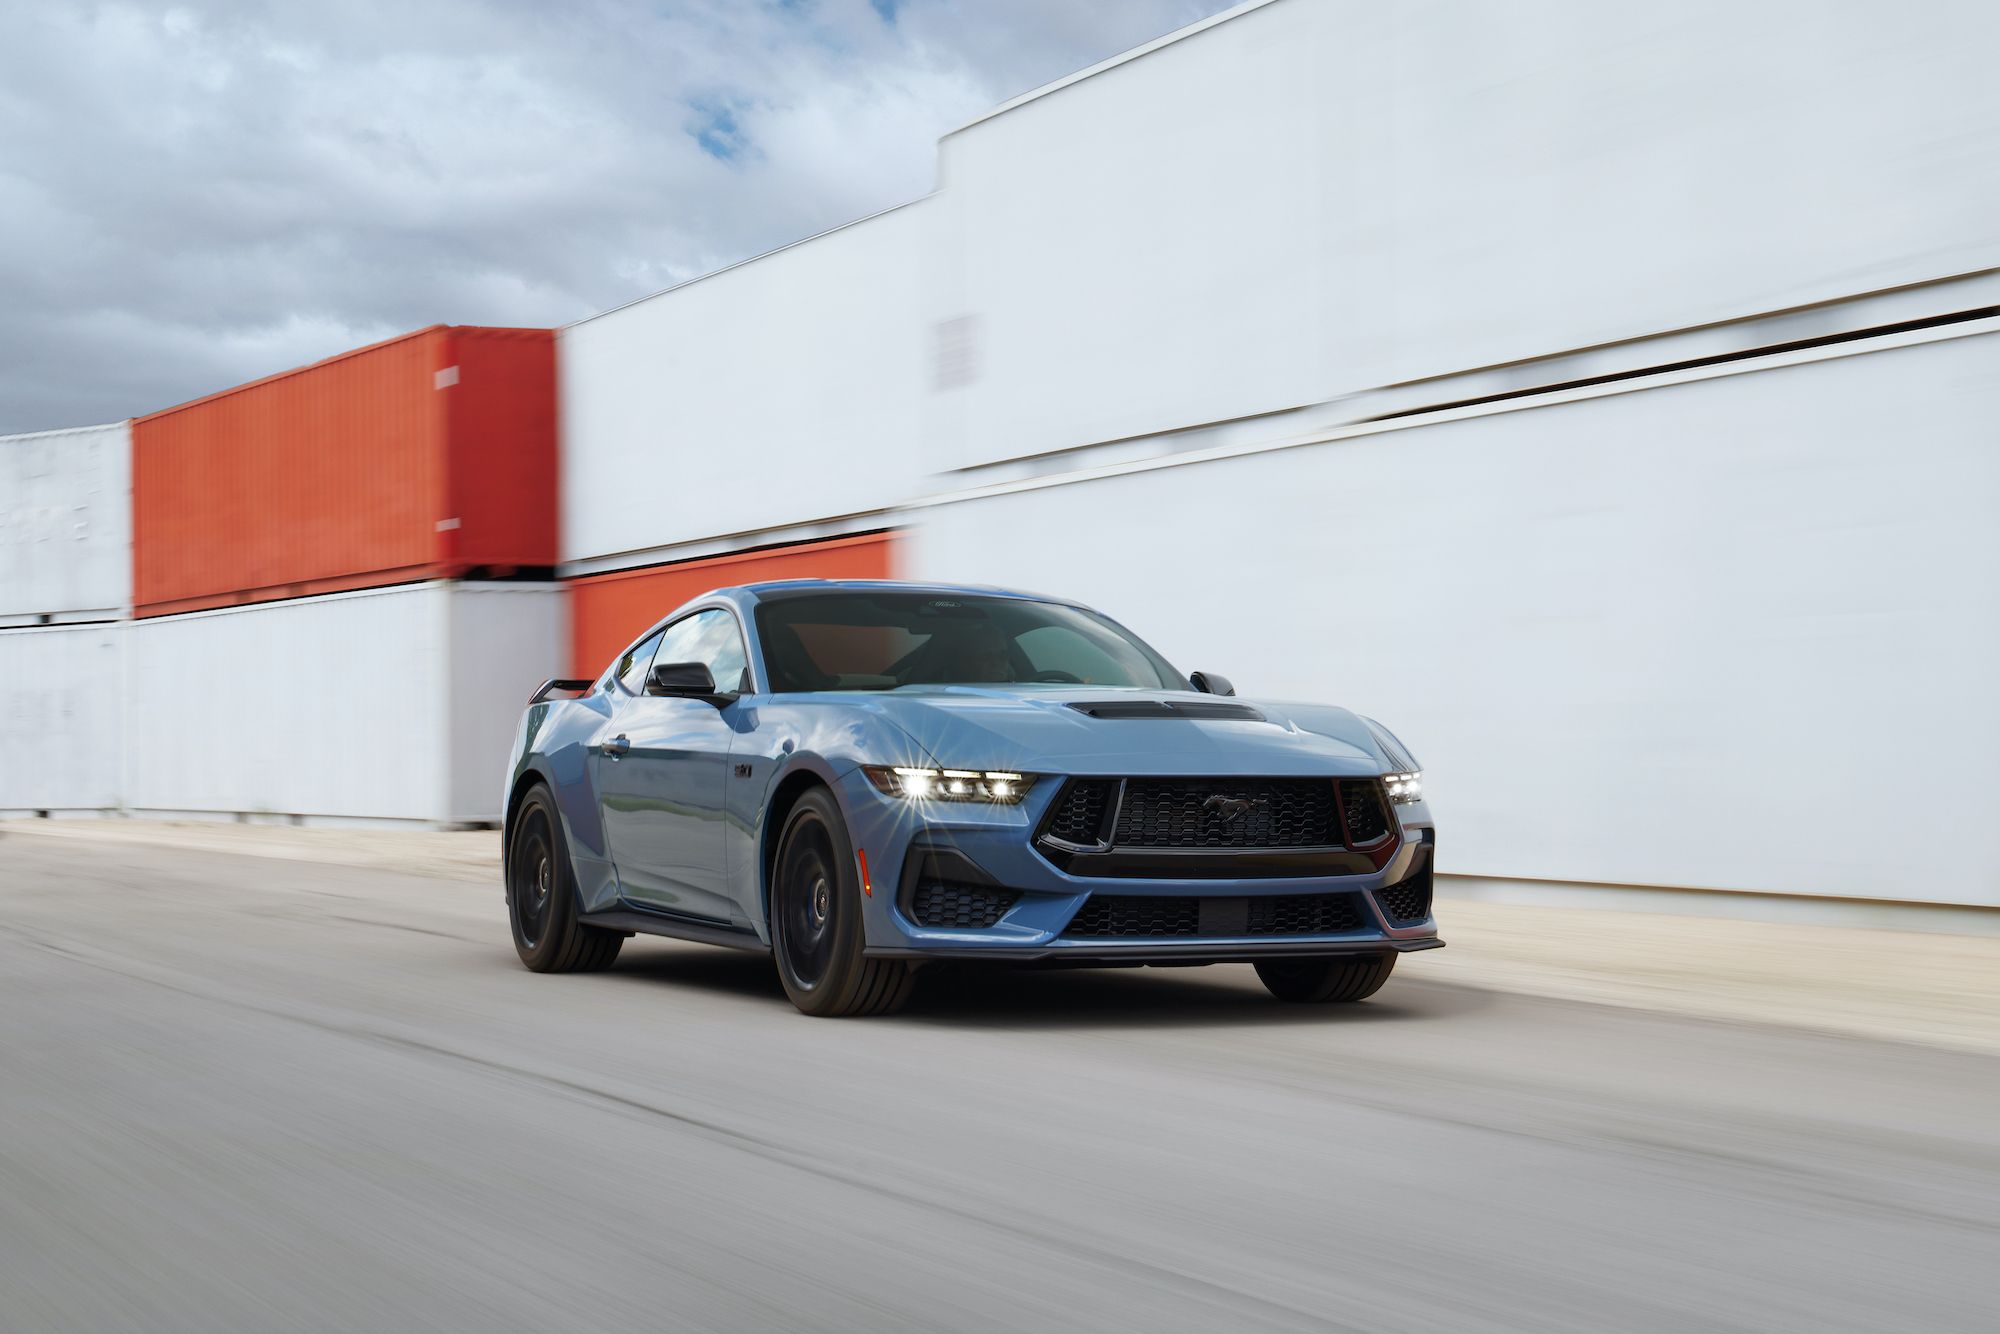 Ford Mustang Coupe: Models, Generations and Details